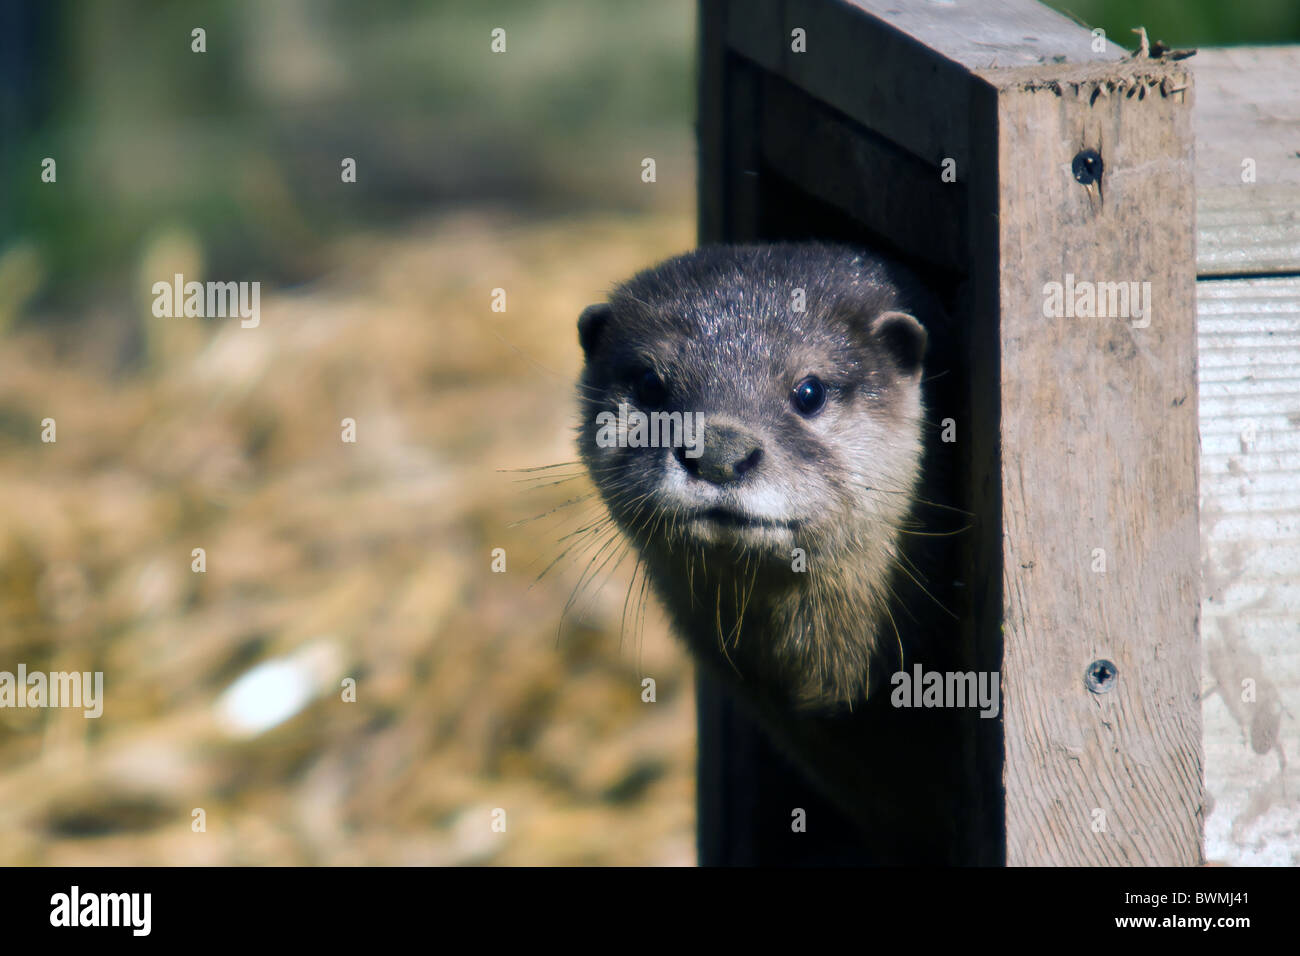 A young otter emerges from a man-made holt near a river in Devon, UK Stock Photo